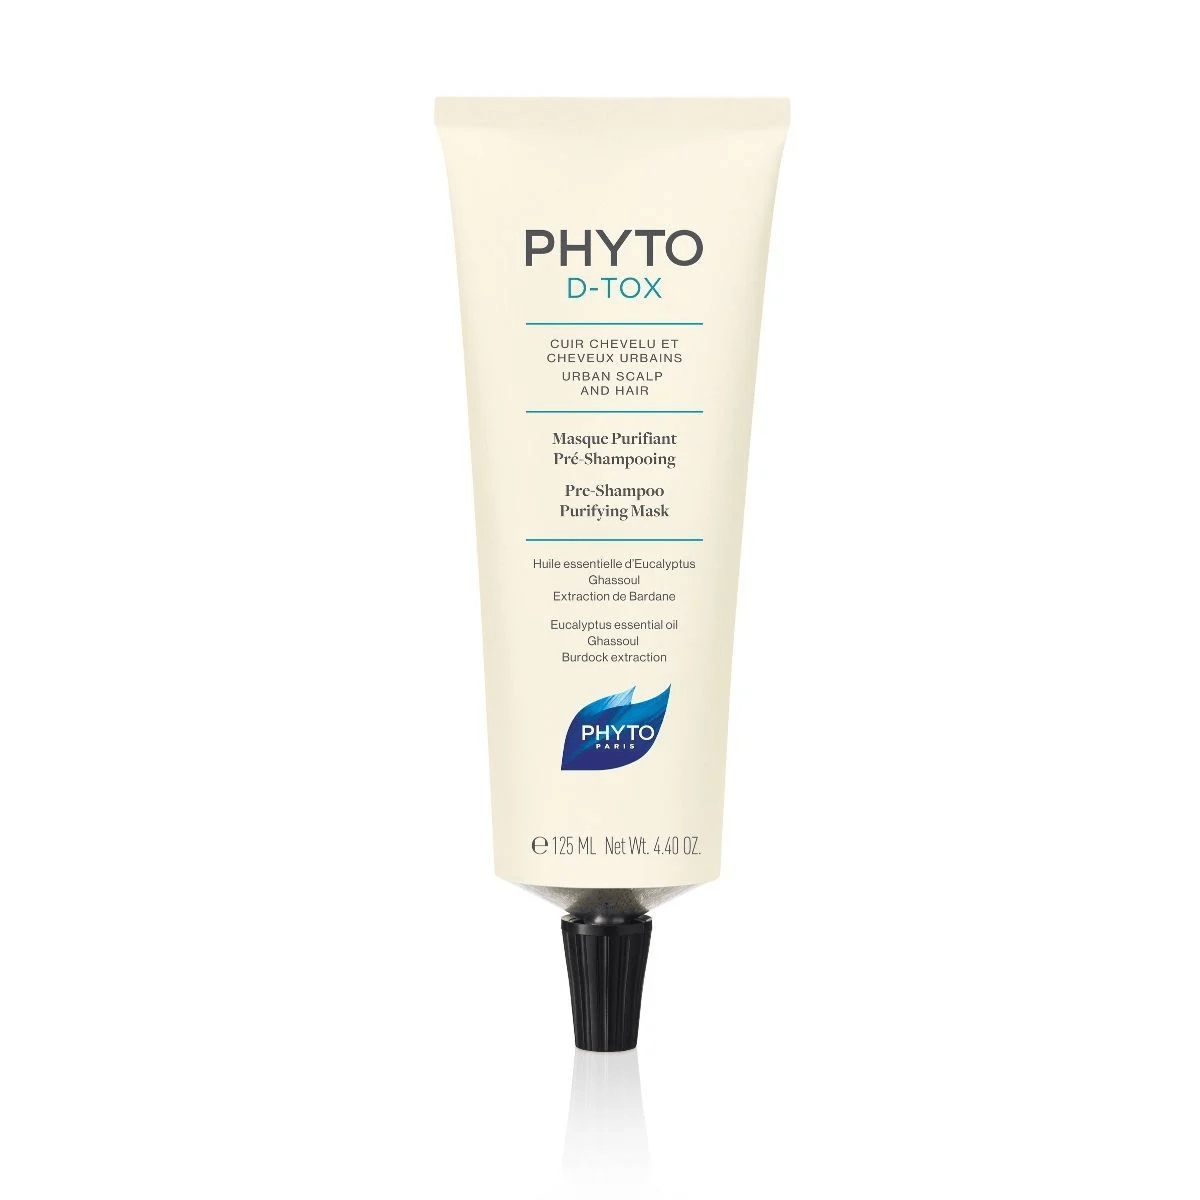 PHYTO Soins & Beauté PhytoD-tox (masque purifiant pré-shampooing) 125ml